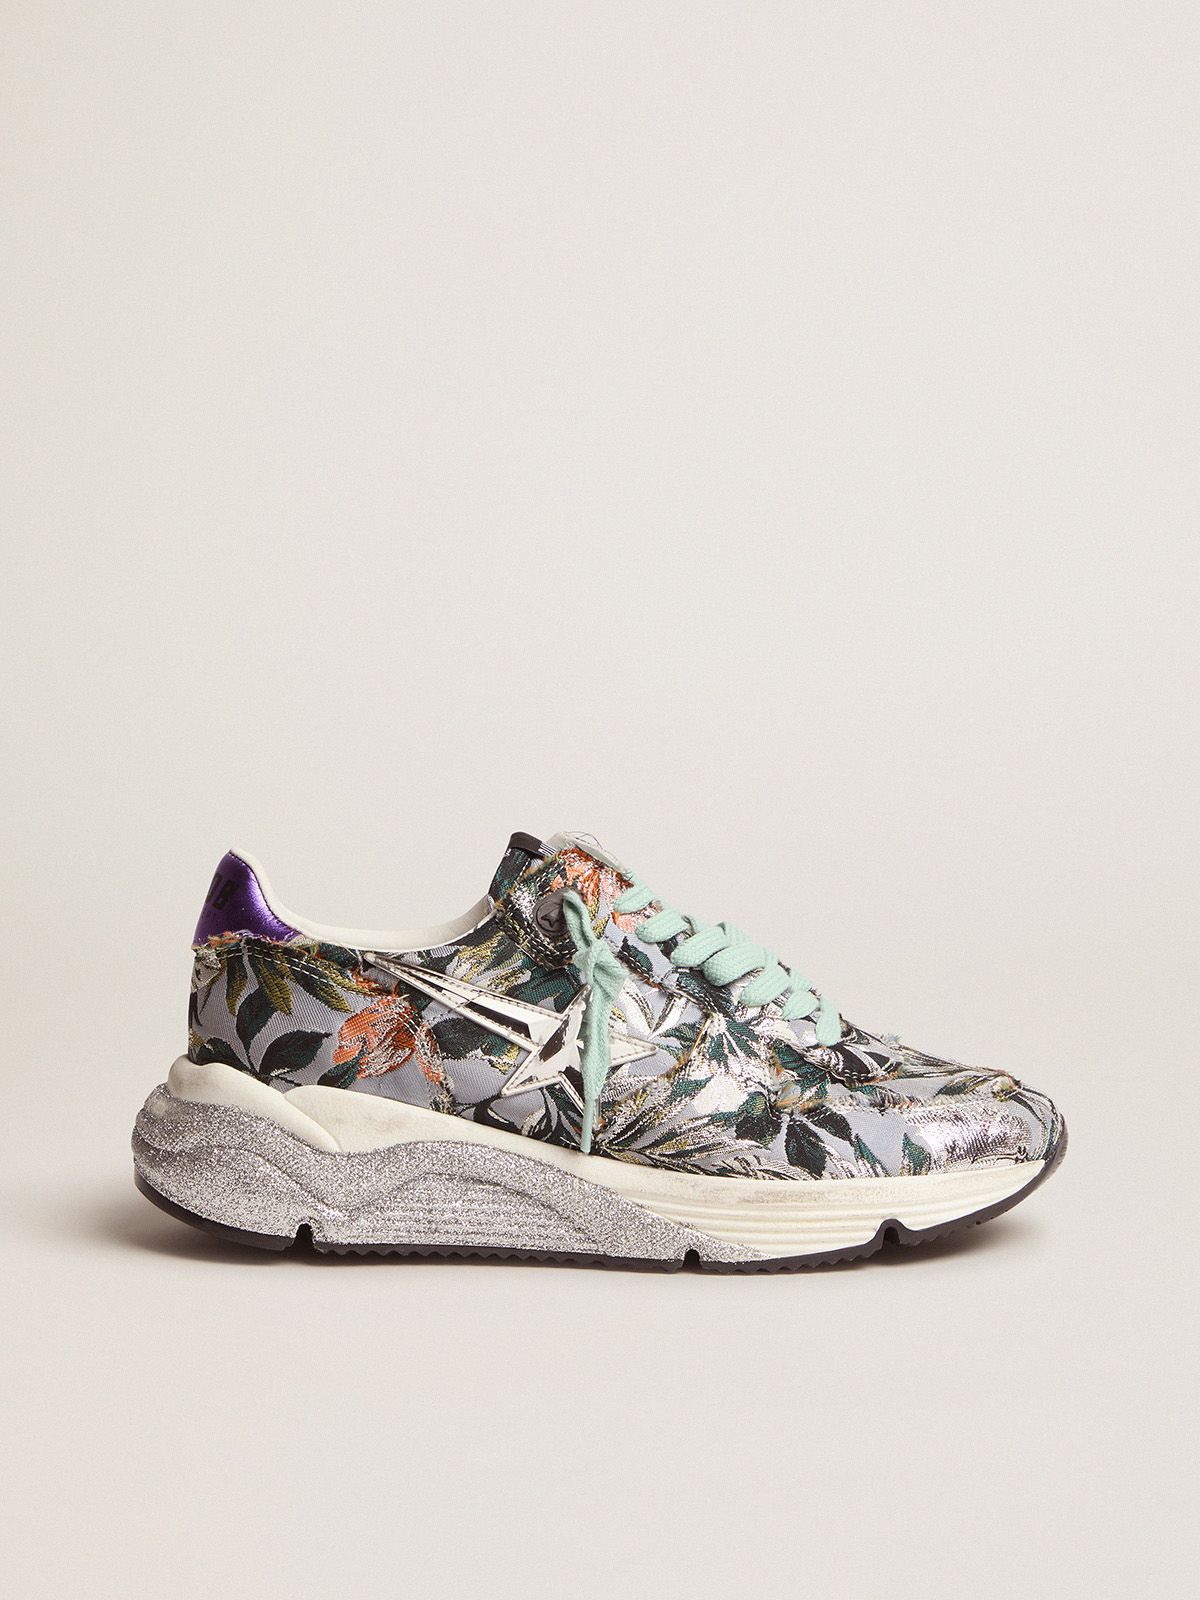 golden goose Running sneakers with floral upper jacquard Sole